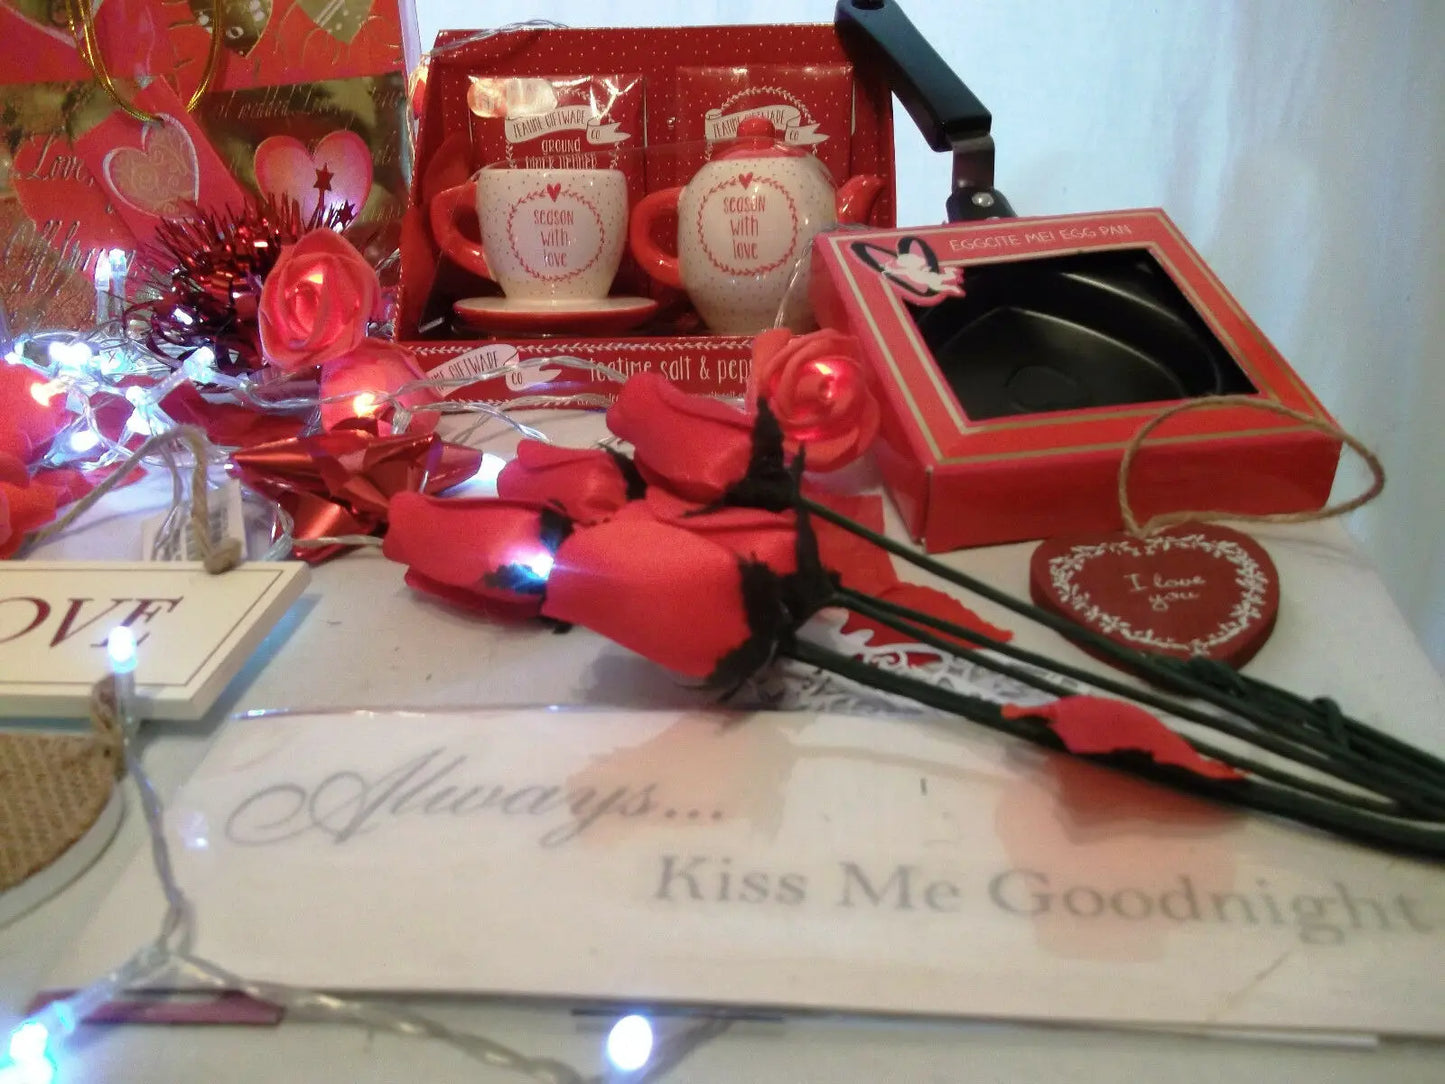 valentines day/mothers day "LOVE" GIFT SET2 - pamper the love of your life Wonkey Donkey Bazaar